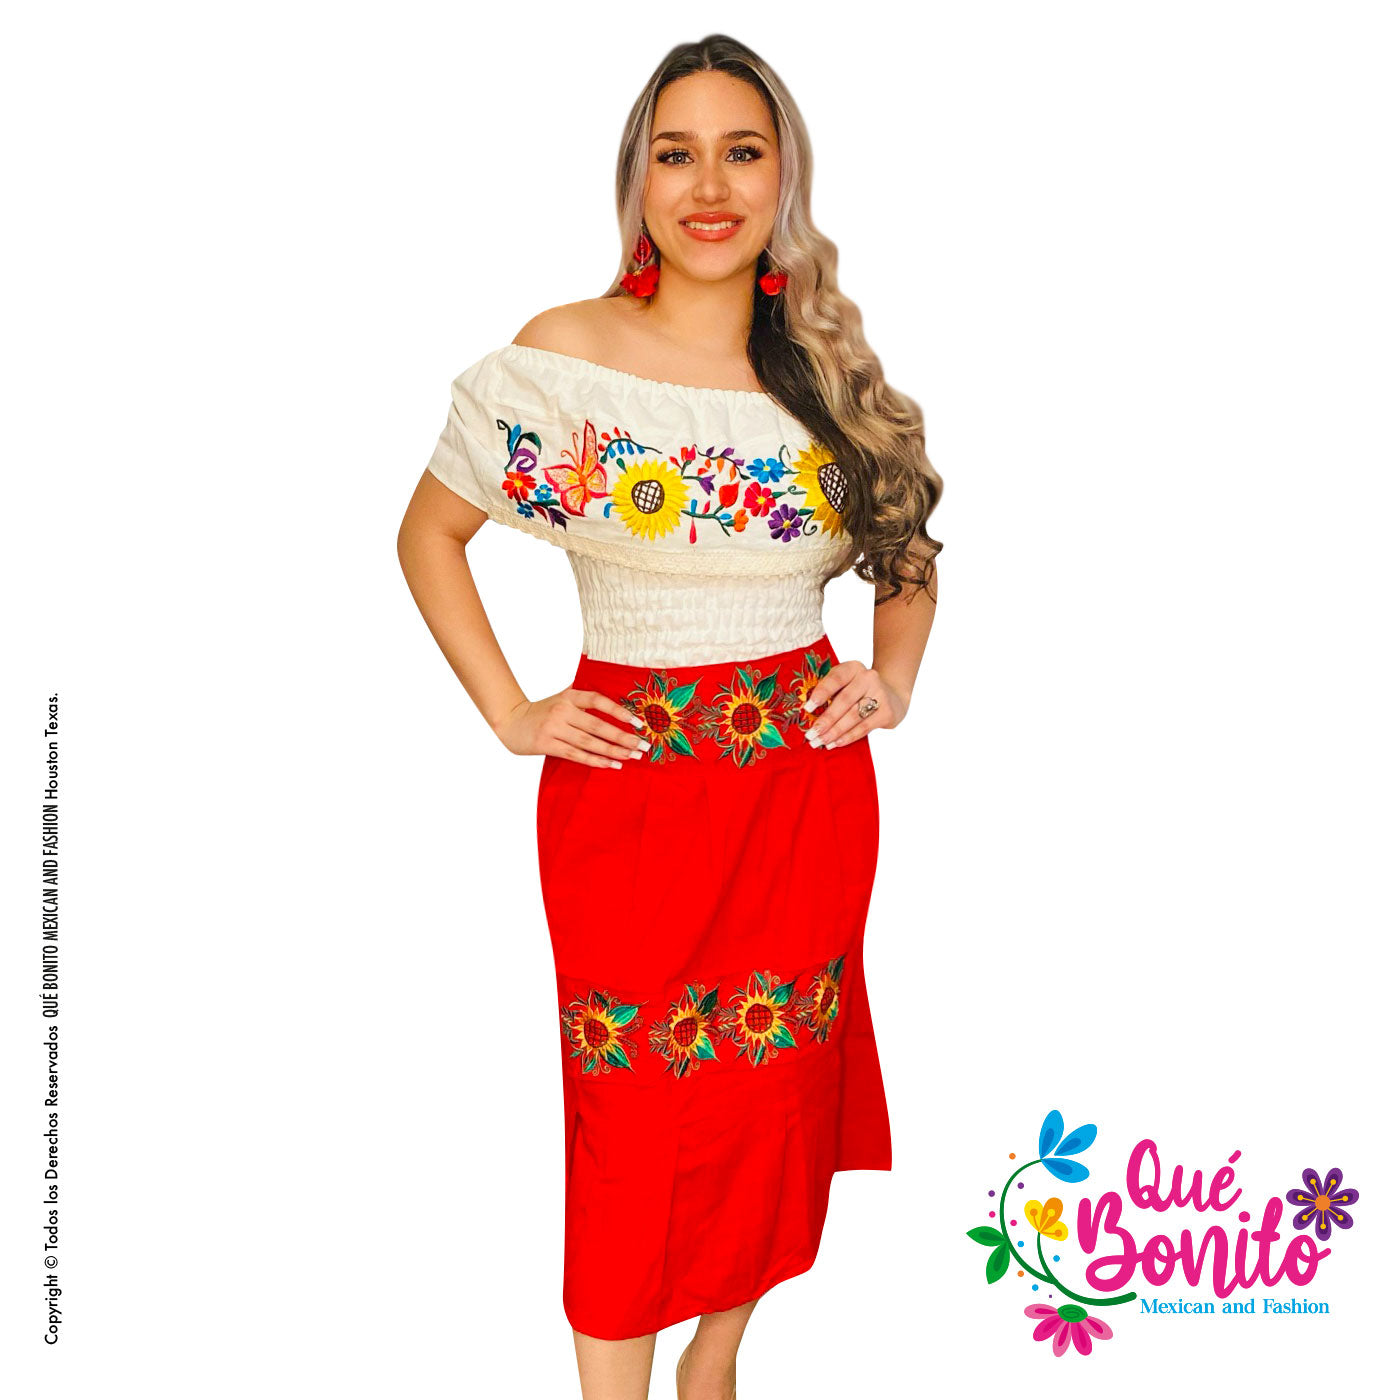 Skirt Sunflower Que Bonito Mexican and Fashion